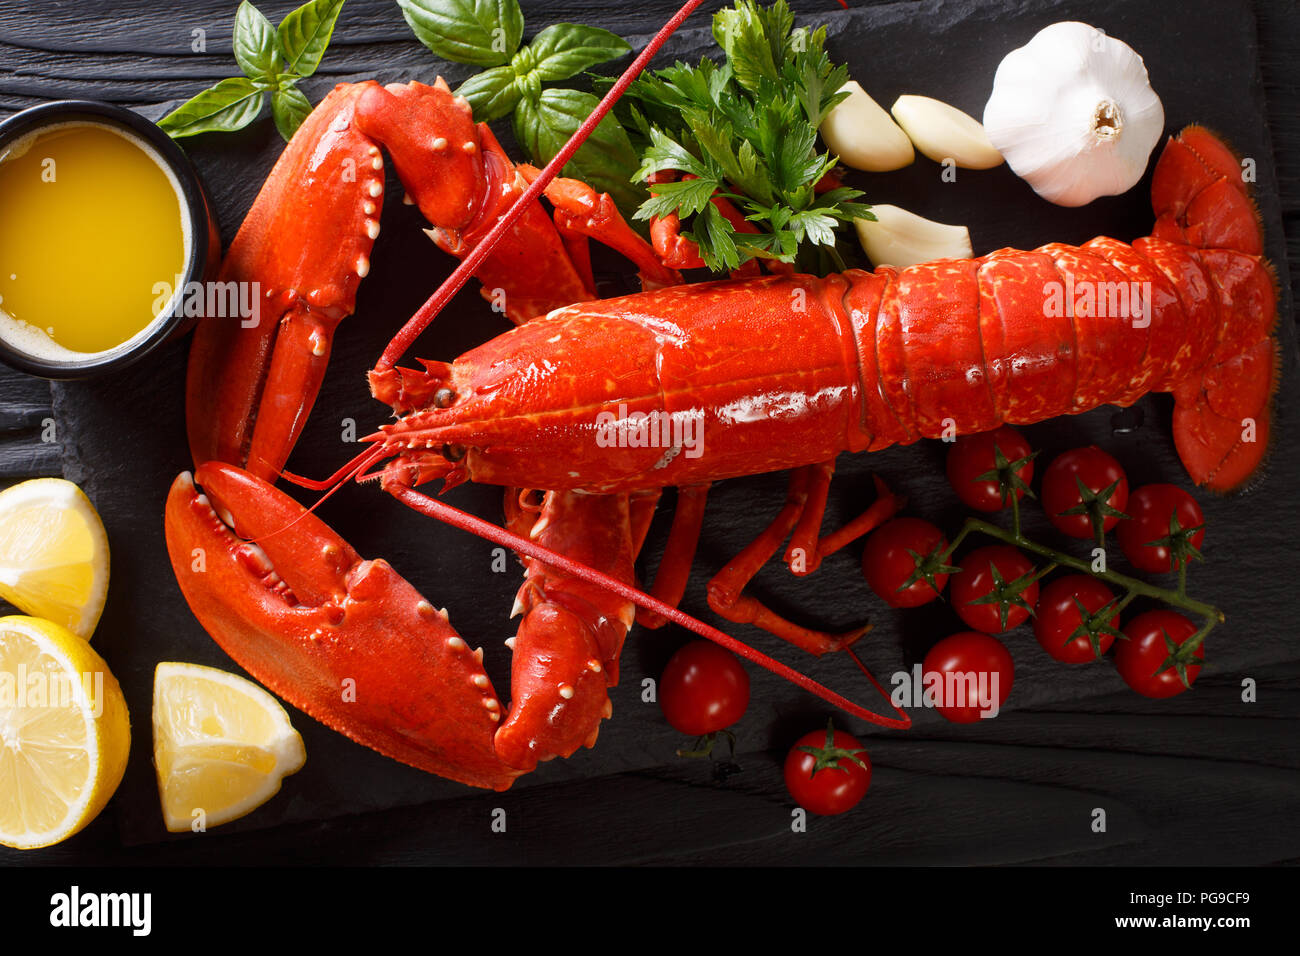 Shellfish plate of crustacean seafood with fresh boiled lobster with vegetables and herbs. gourmet dinner background. Horizontal top view from above Stock Photo